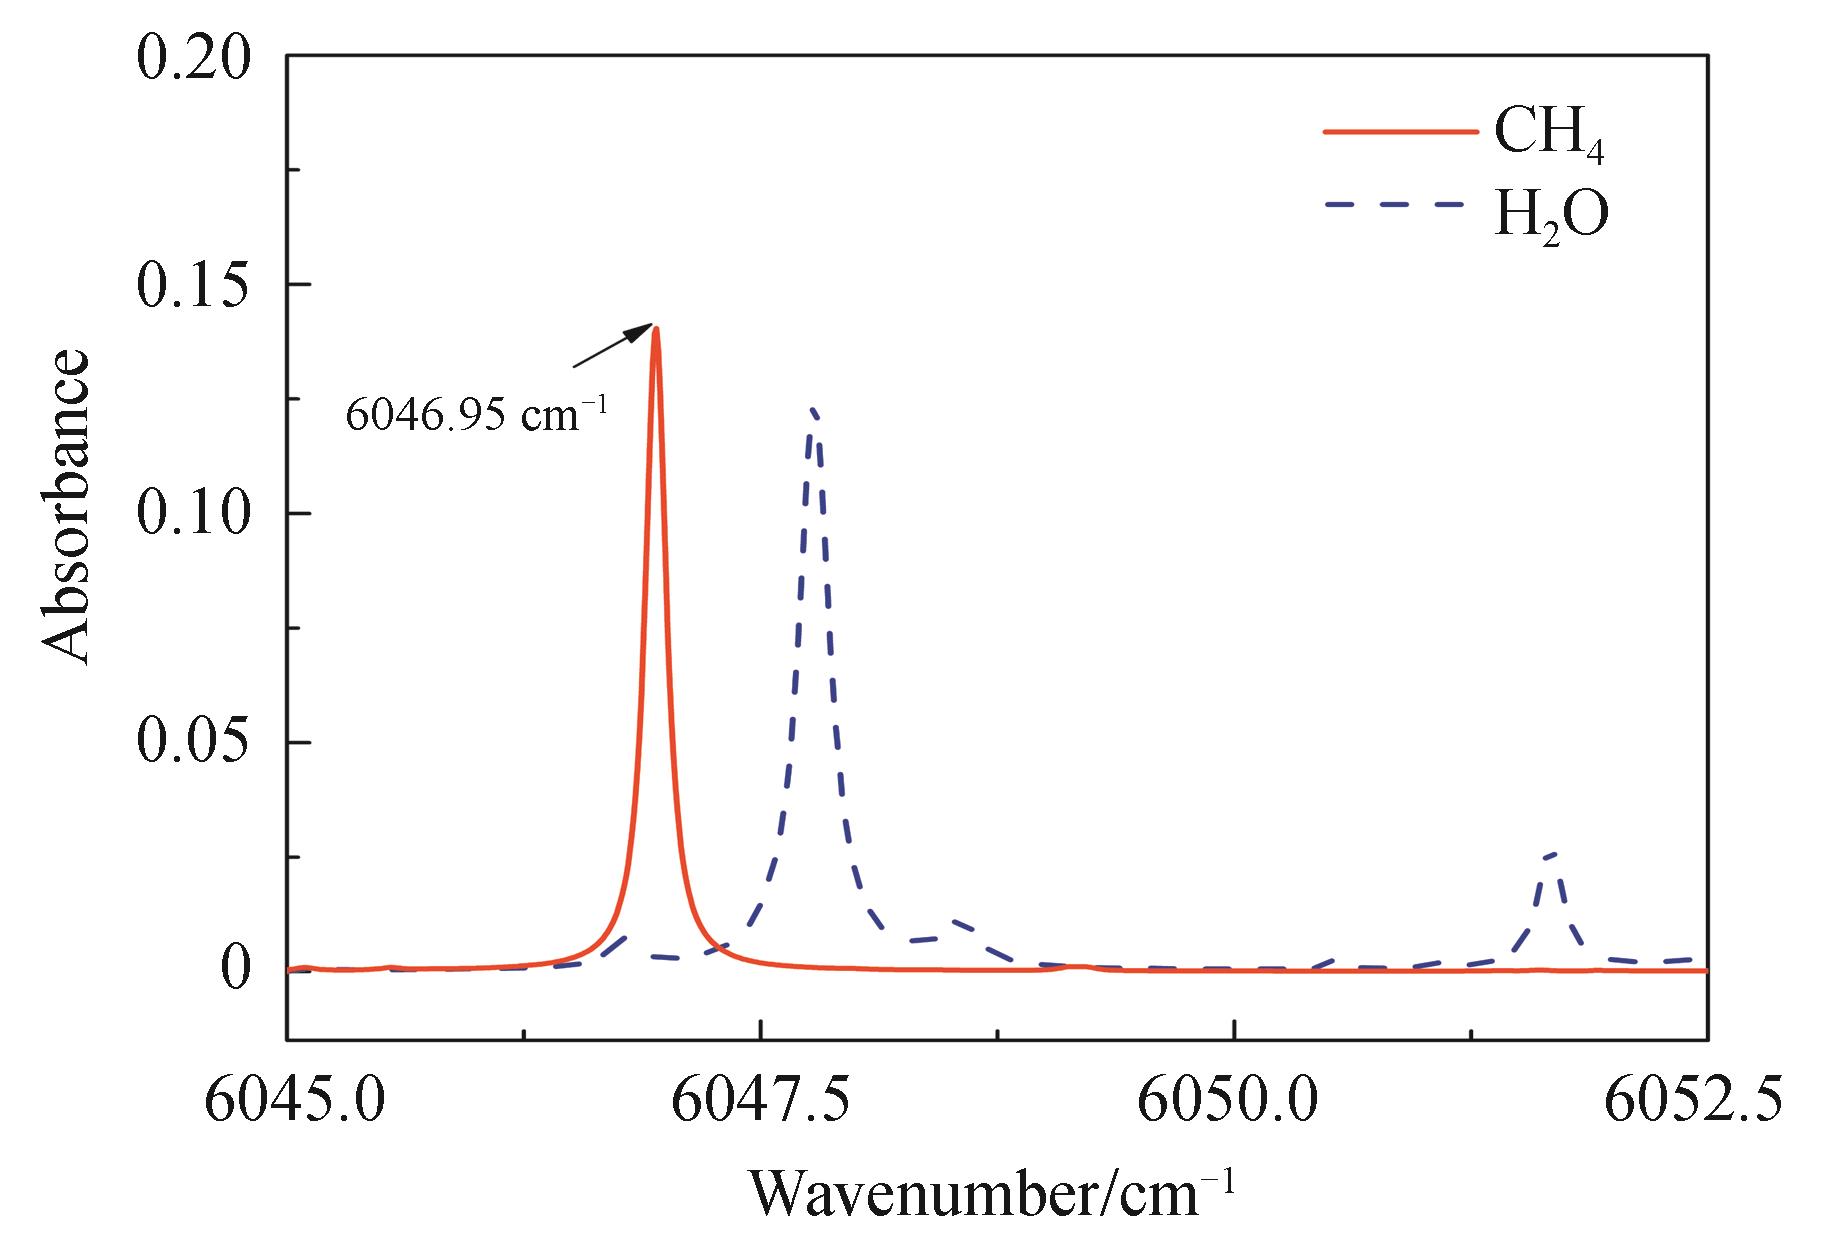 The absorption spectrum of CH4 and H2Oin the near-infrared